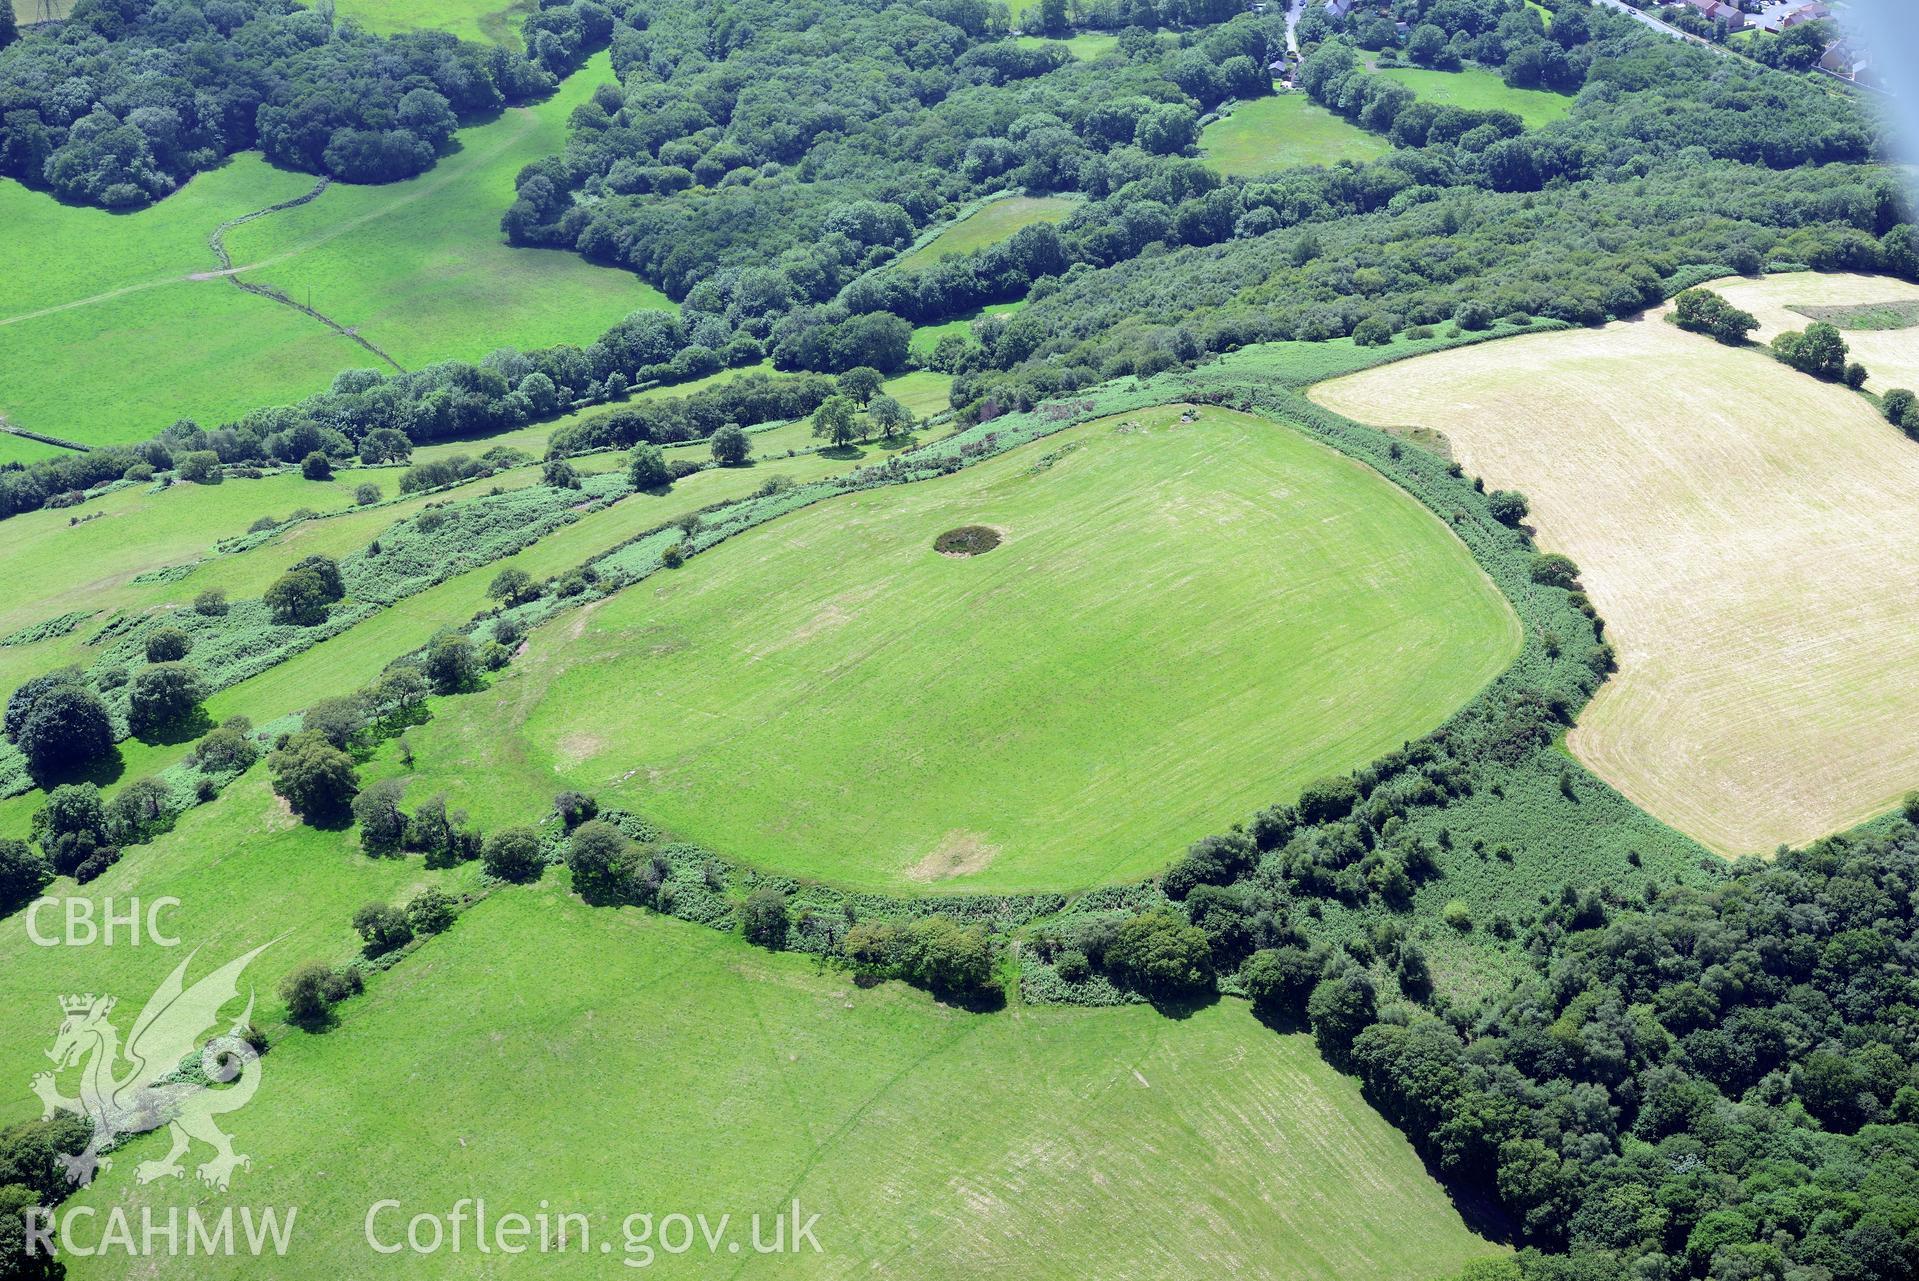 Caerau Hillfort and supposed site of battle, Rhiwsaeson, Llantrisant. Oblique aerial photograph taken during the Royal Commission's programme of archaeological aerial reconnaissance by Toby Driver on 29th June 2015.